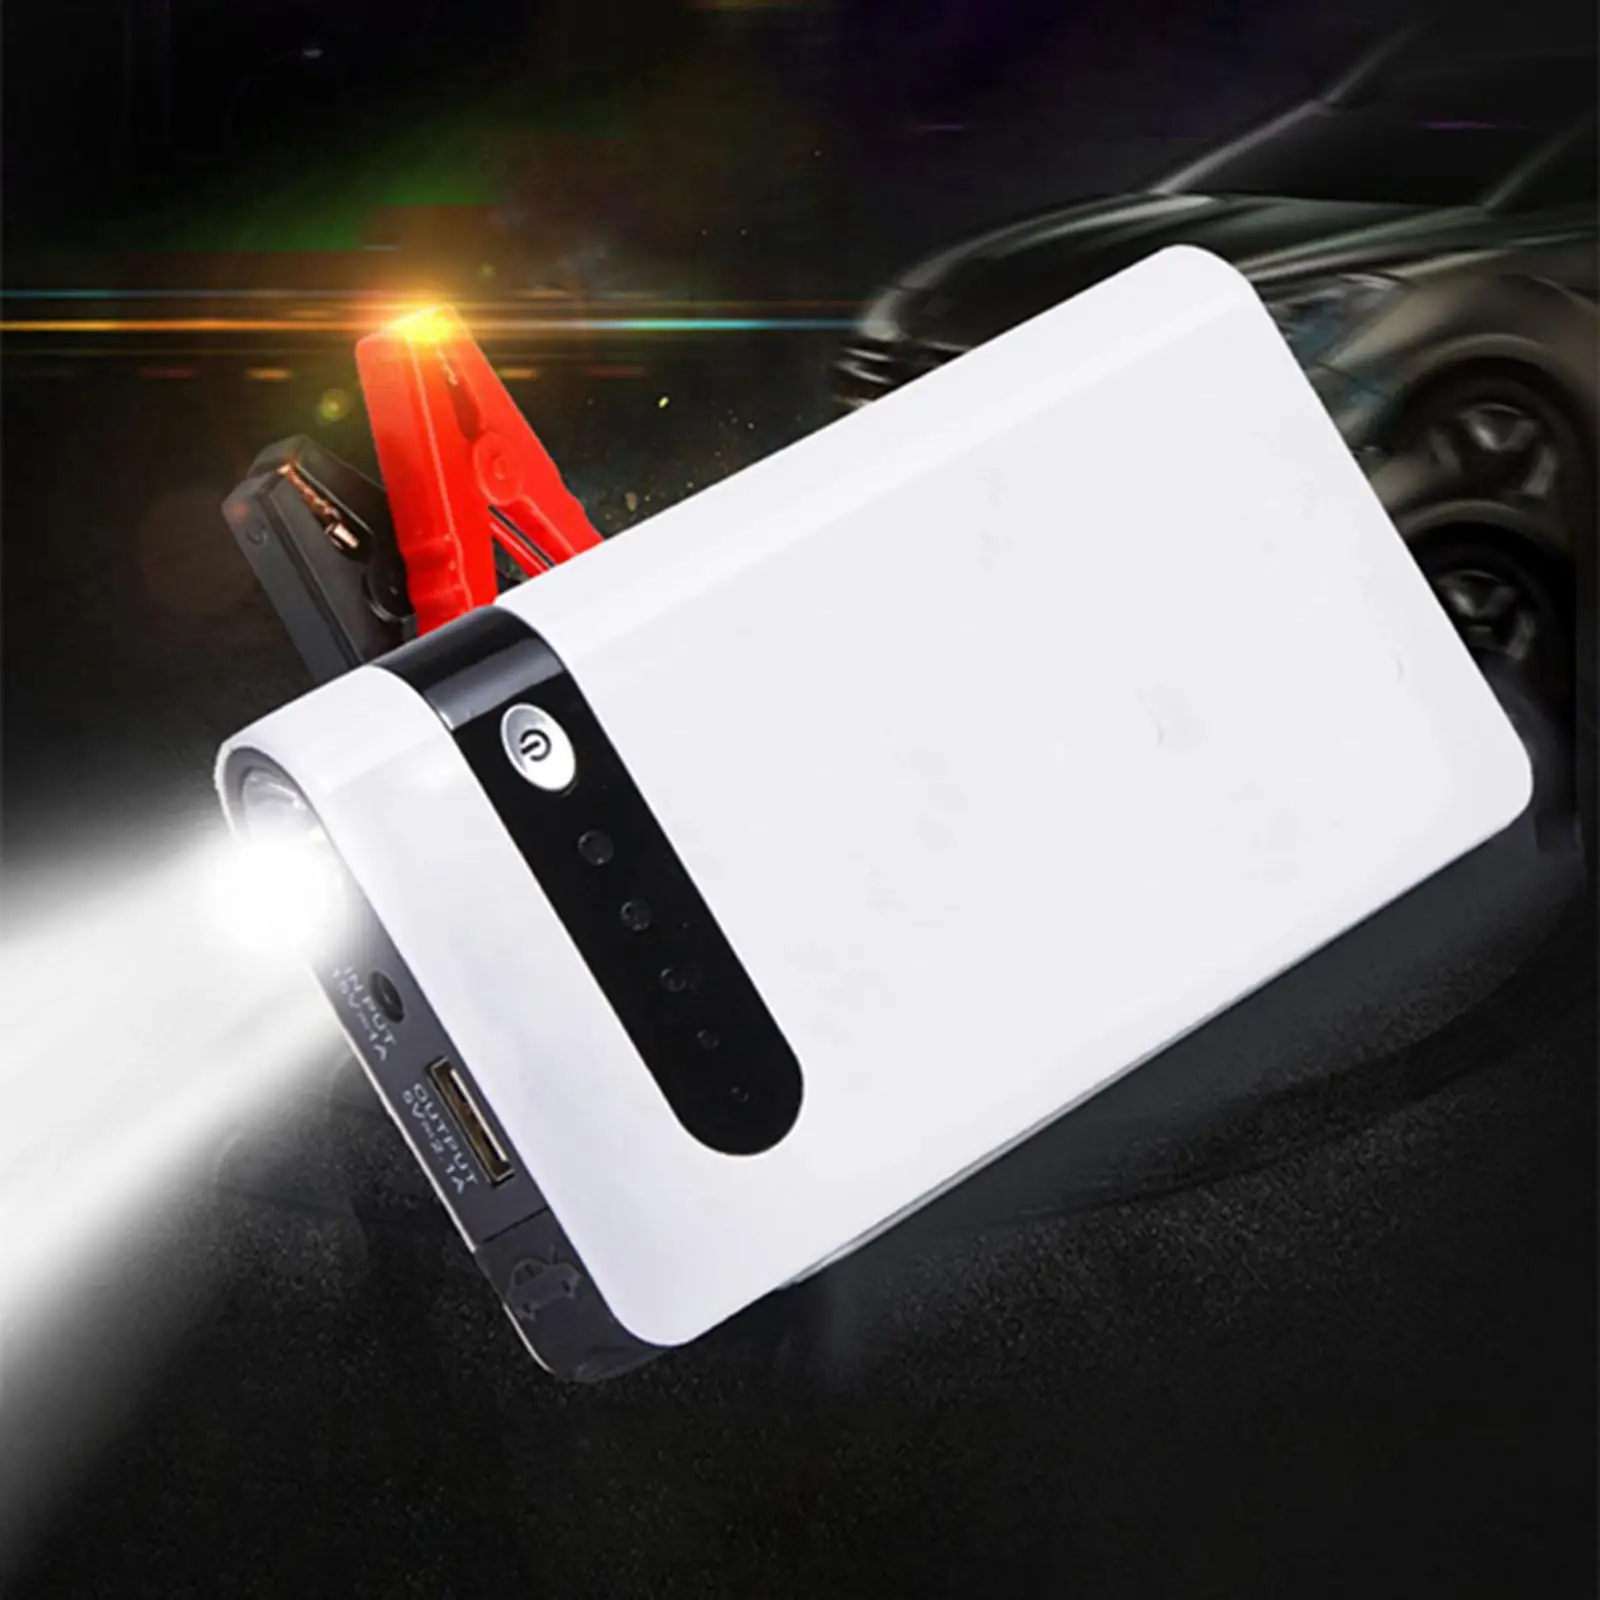 Car Jump Starter with Flashlight Portable 12V 8000mAh Power Pack Power Bank Charger Fit for MP4 Psp Mobile Phone Tablet Laptop